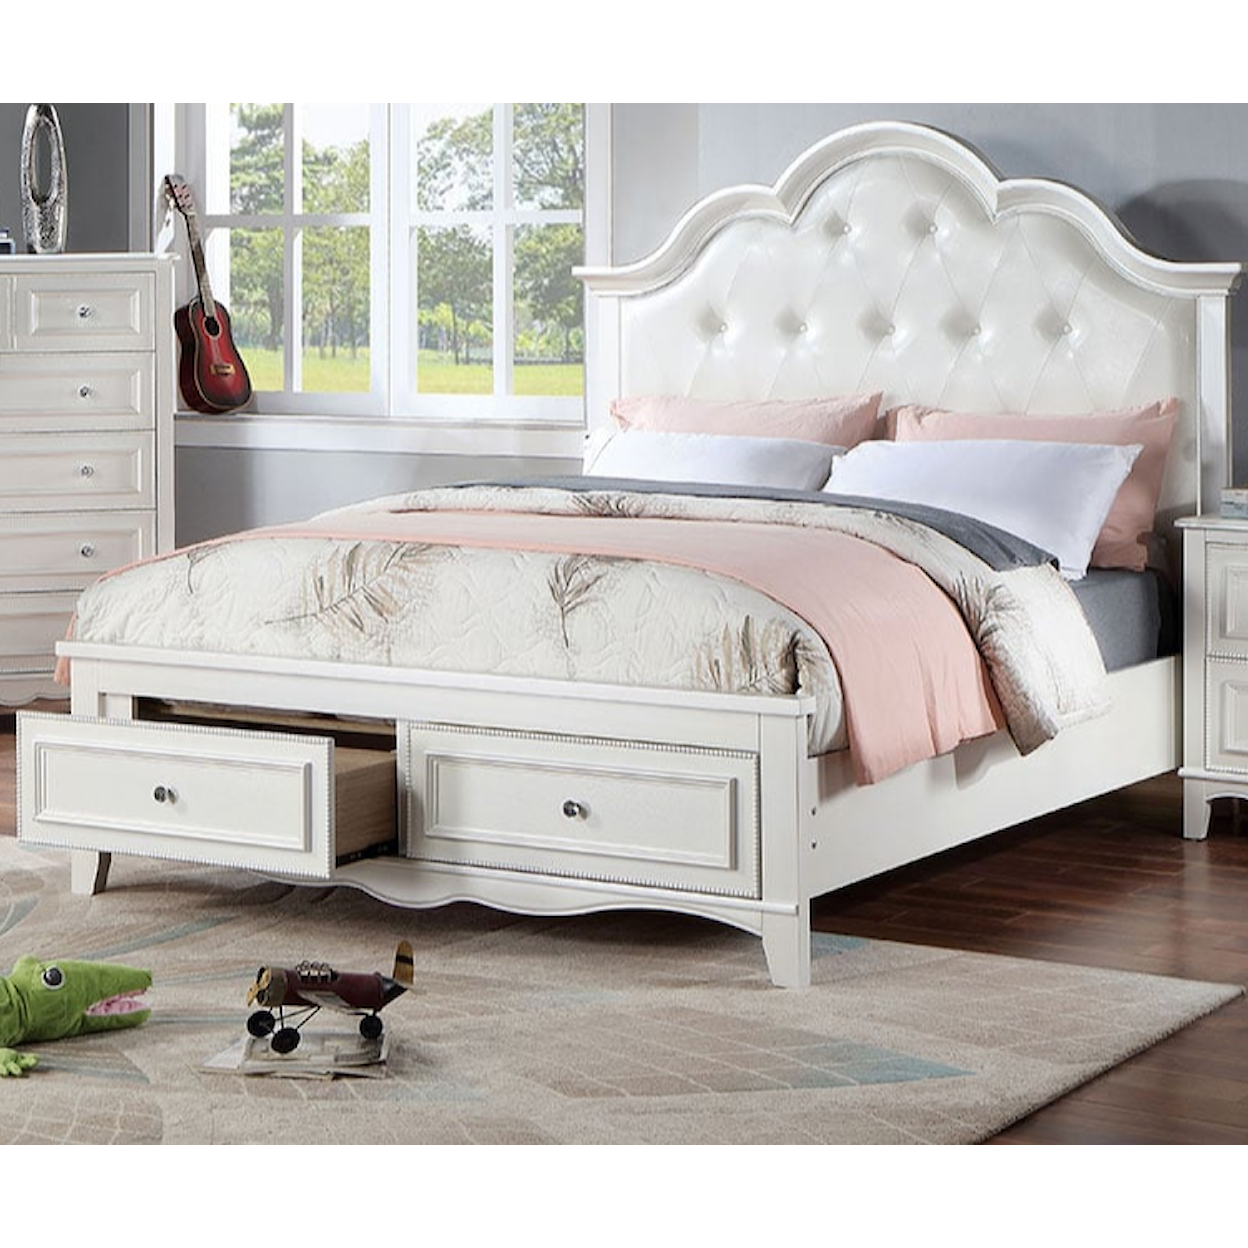 Furniture of America CADENCE Upholstered Full Bed with Footboard Storage